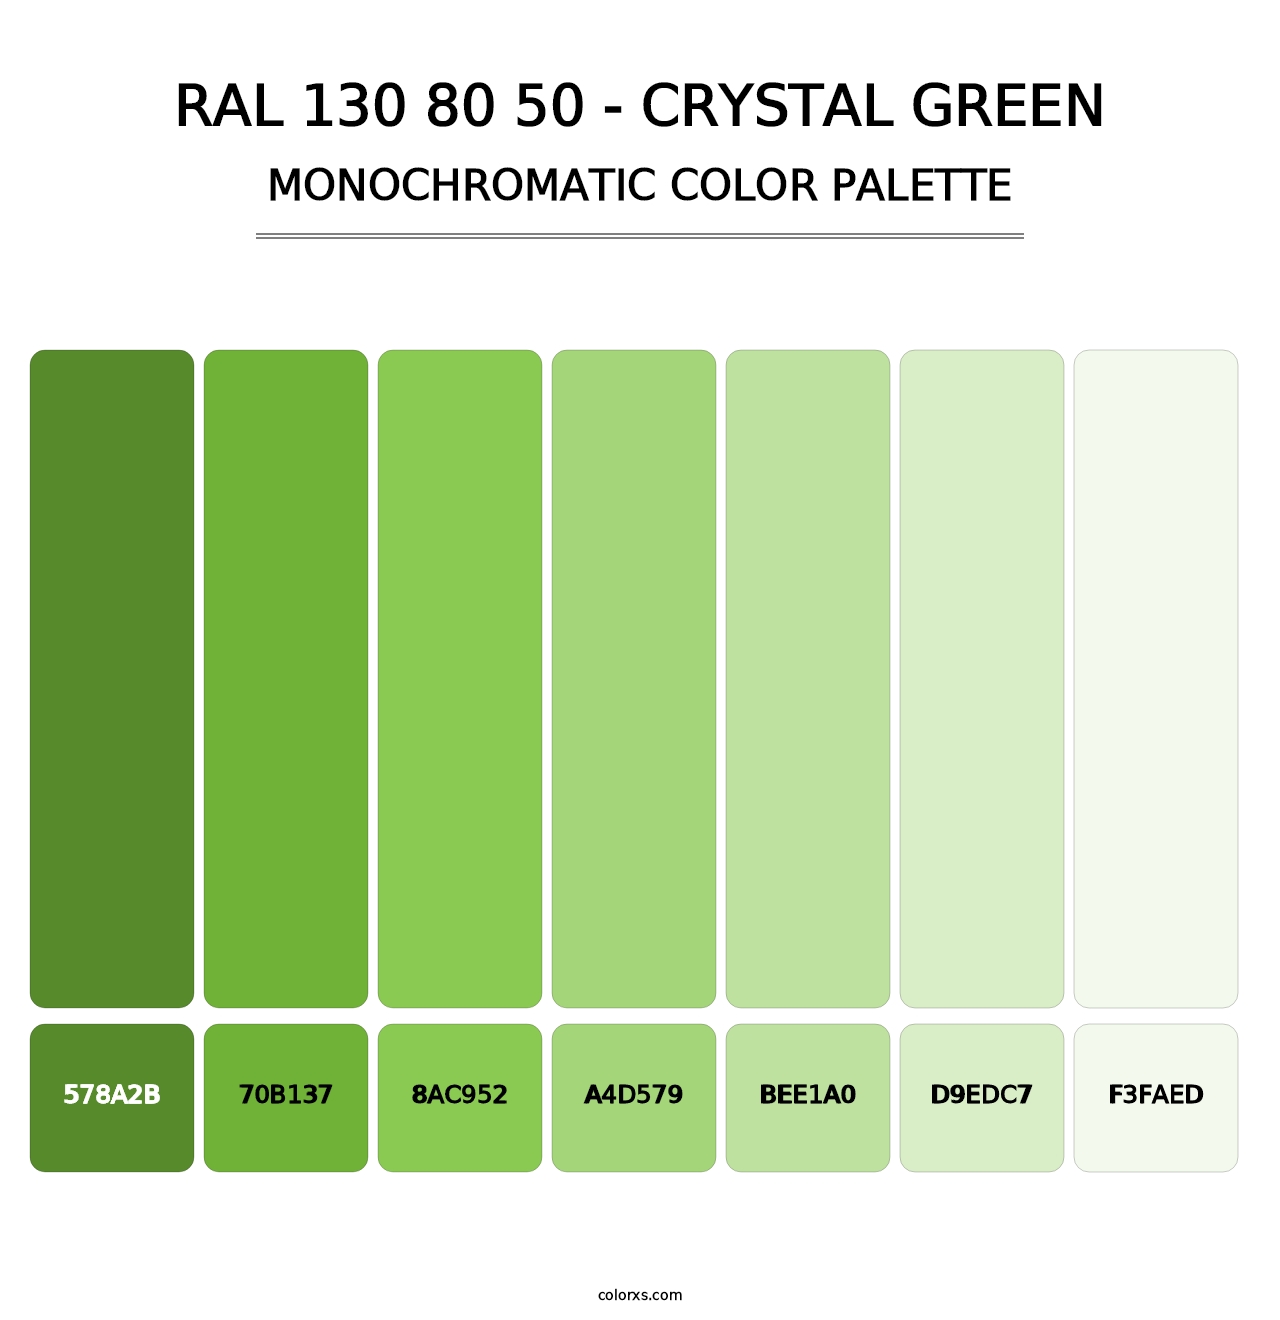 RAL 130 80 50 - Crystal Green - Monochromatic Color Palette